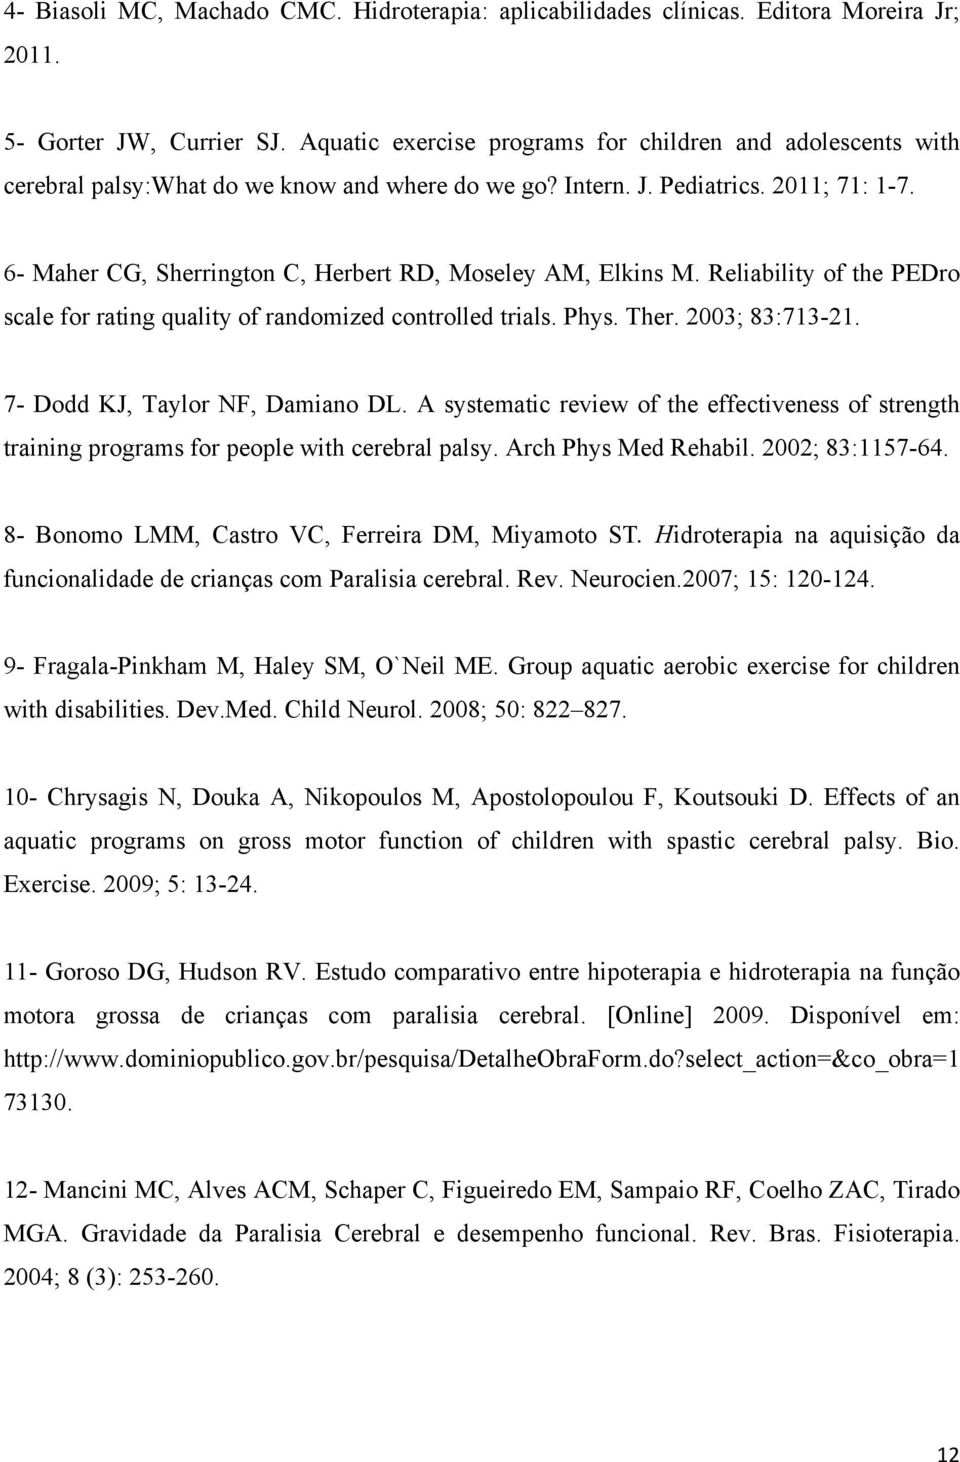 6- Maher CG, Sherrington C, Herbert RD, Moseley AM, Elkins M. Reliability of the PEDro scale for rating quality of randomized controlled trials. Phys. Ther. 2003; 83:713-21.